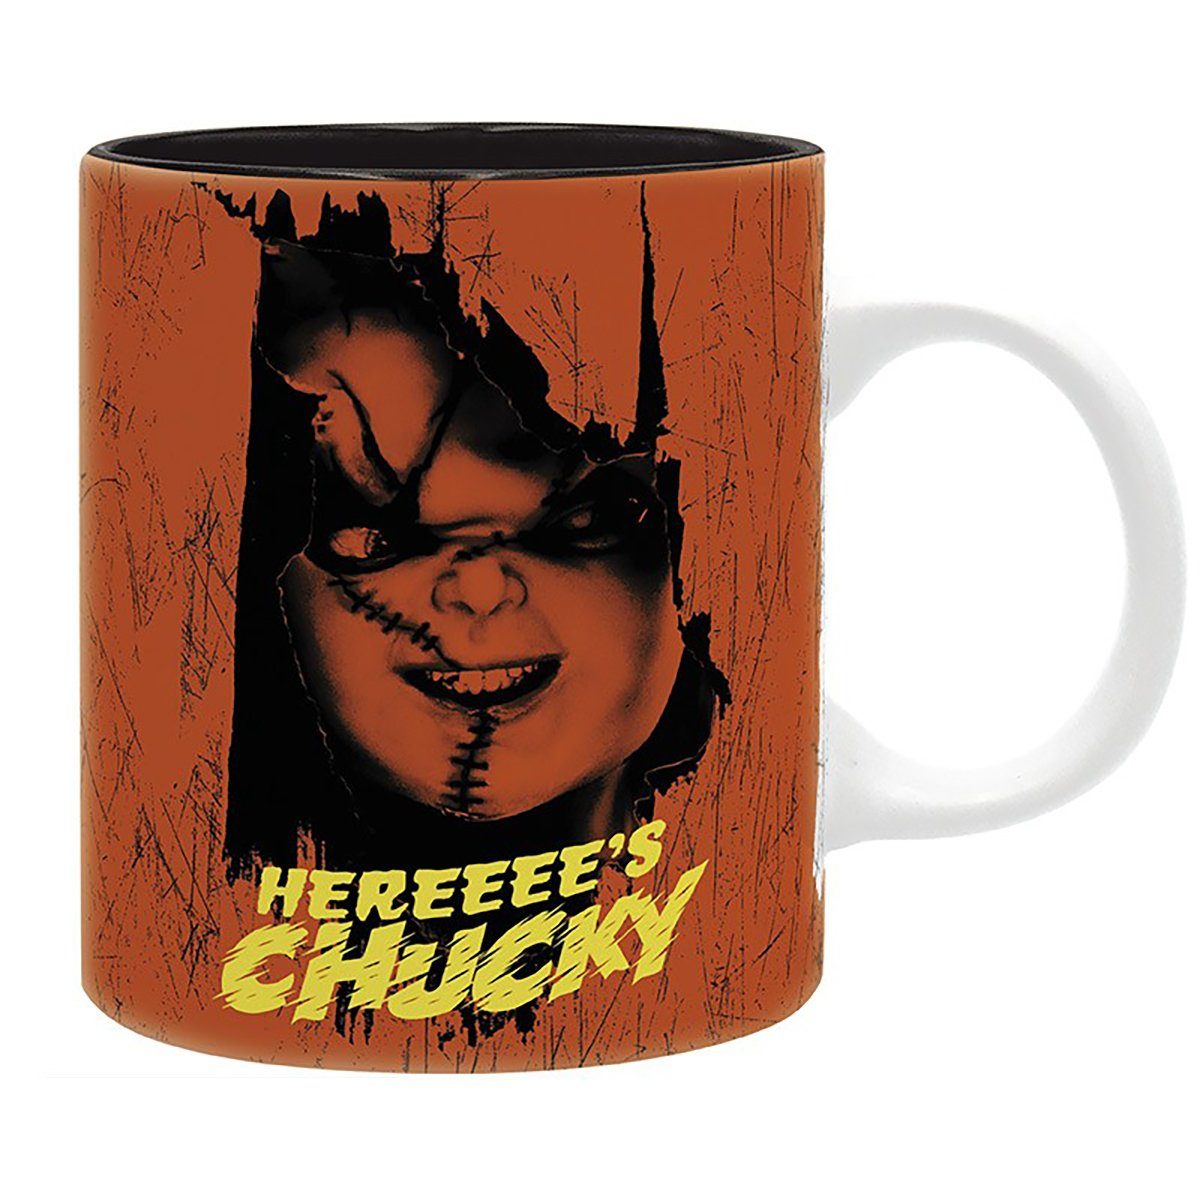 till ABYstyle end Chucky Tasse Friends the Tasse